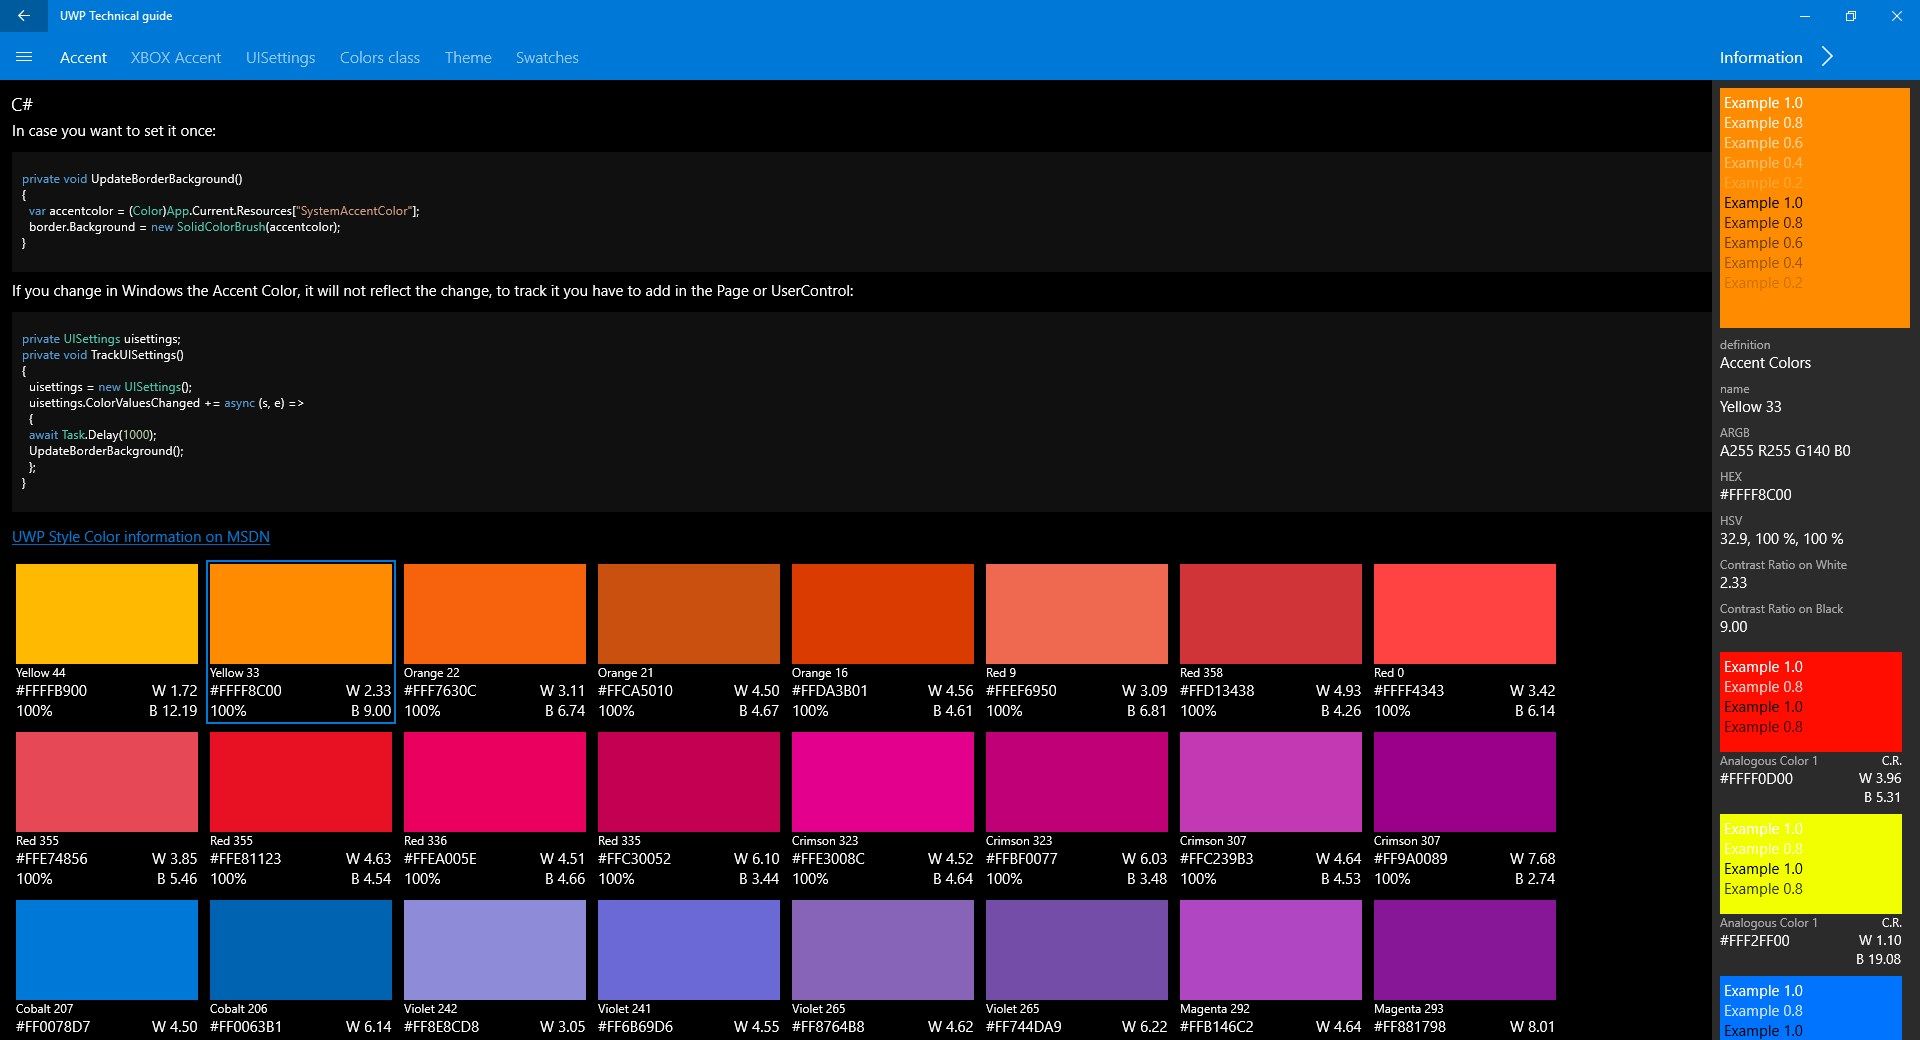 Really complete information about each Color included in the different classes of Windows.